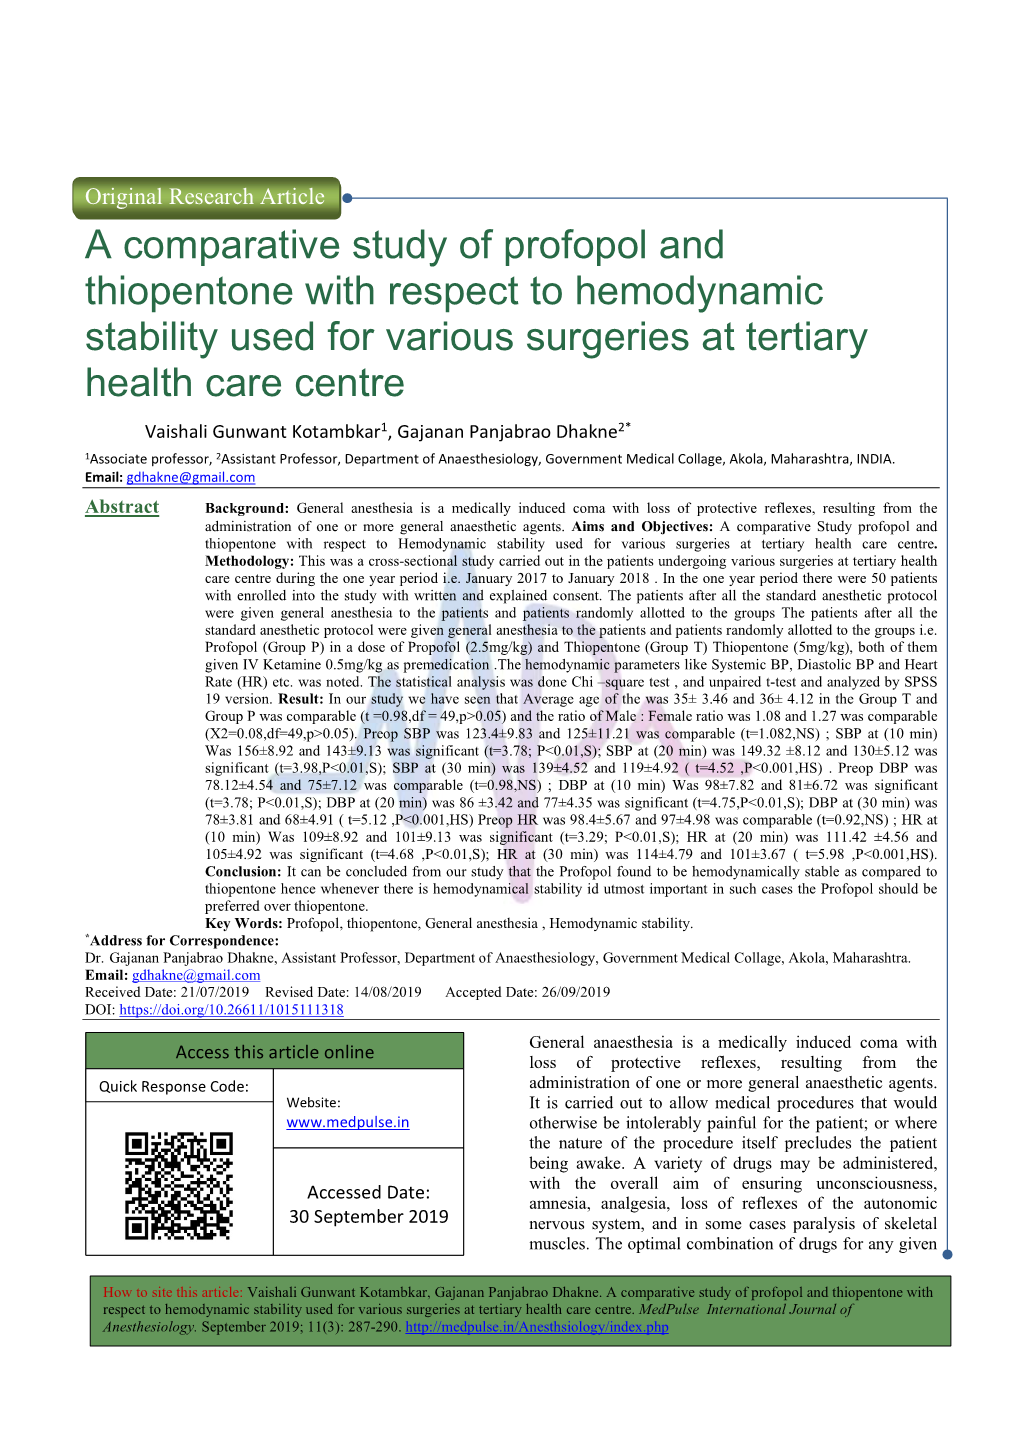 A Comparative Study of Profopol and Thiopentone with Respect to Hemodynamic Stability Used for Various Surgeries at Tertiary Health Care Centre